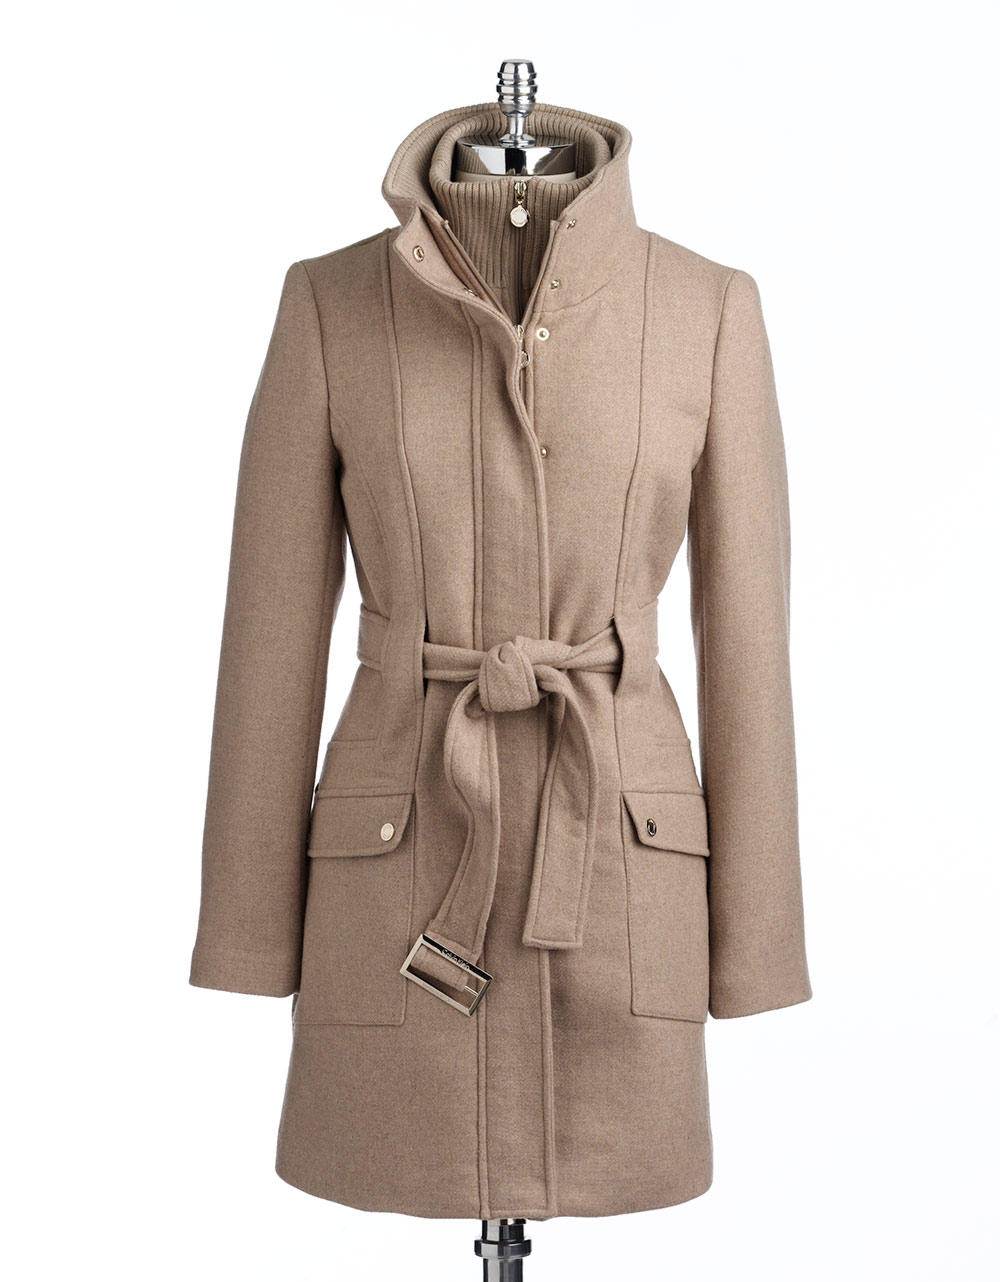 Lyst - Calvin Klein Rib Knit Belted Coat in Natural